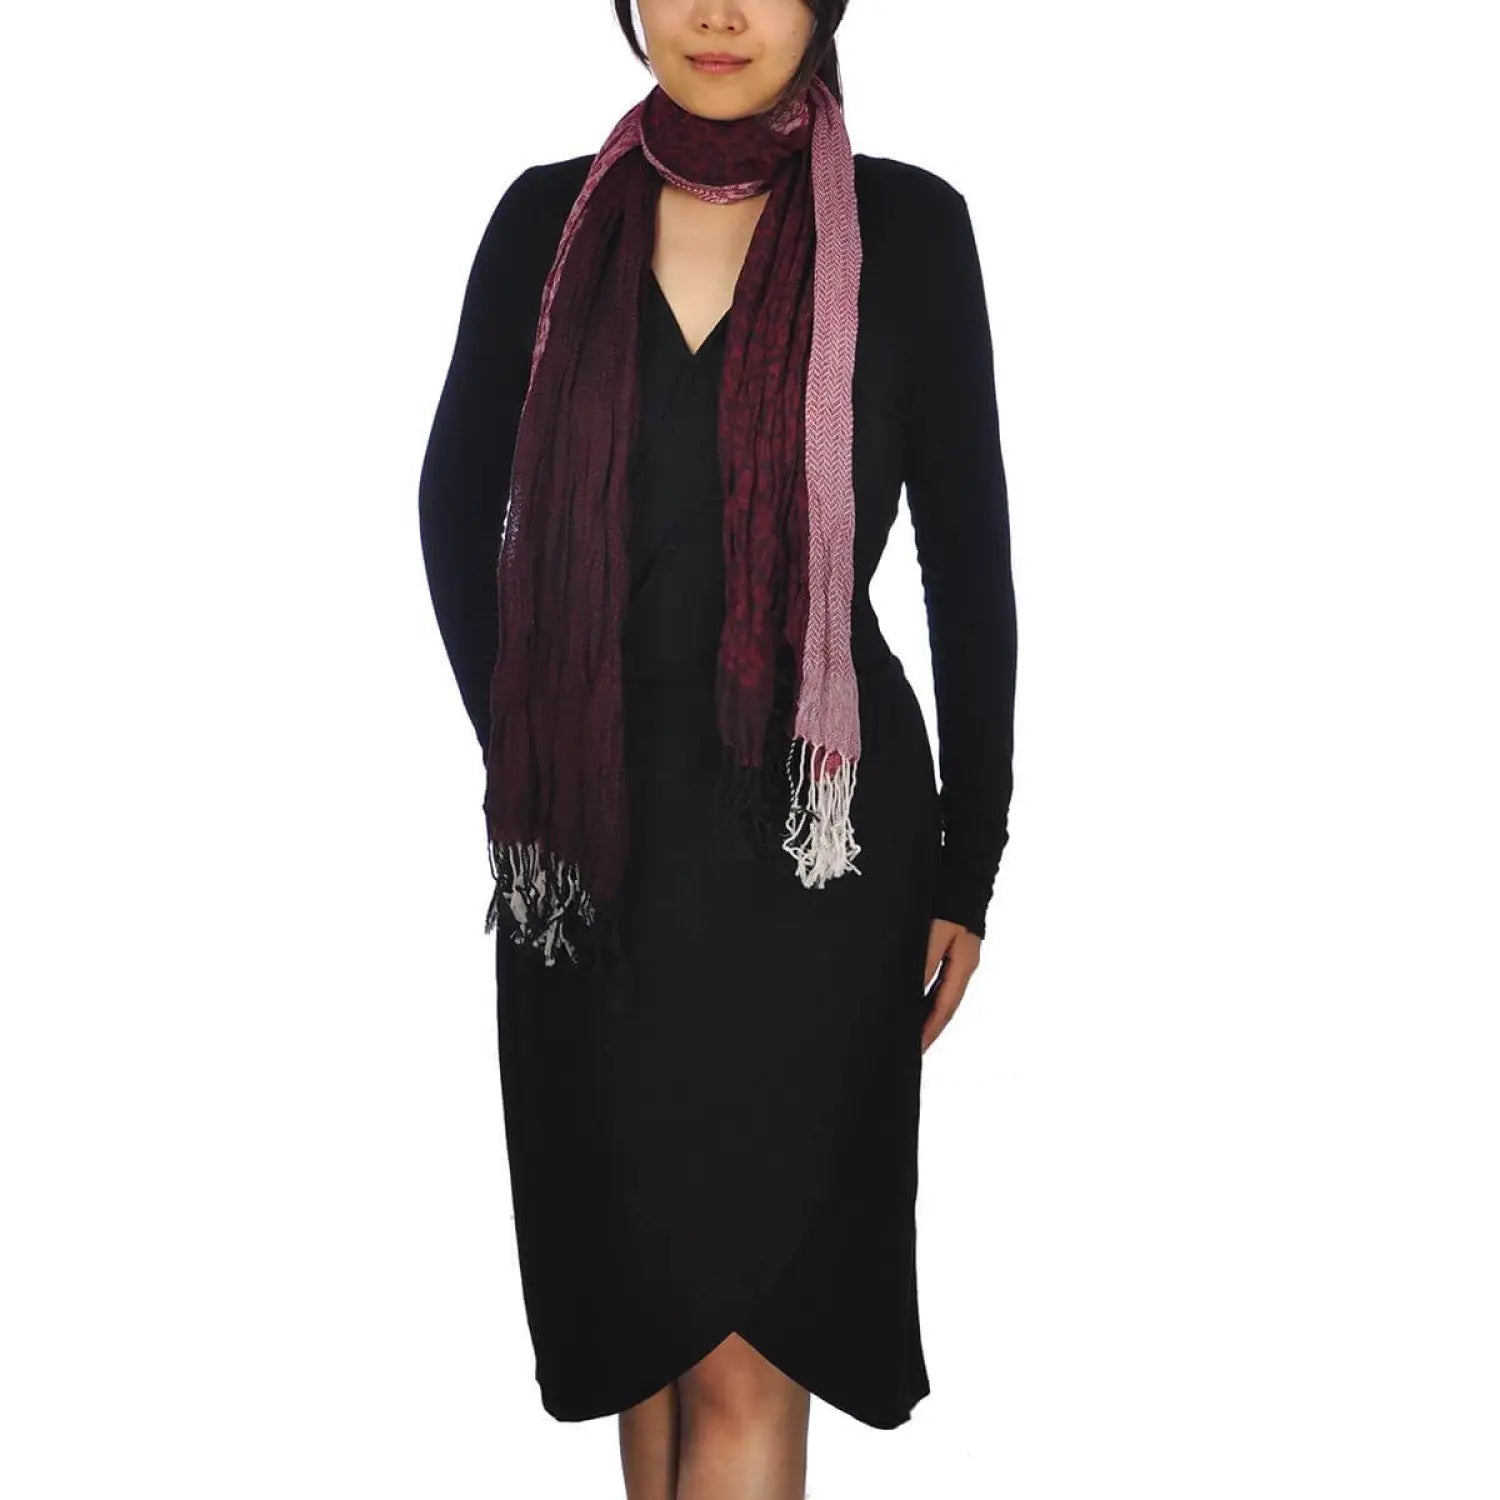 Woman in black dress and maroon scarf showcasing Chic Crinkled Stripes & Leopard Print Tasselled Scarf